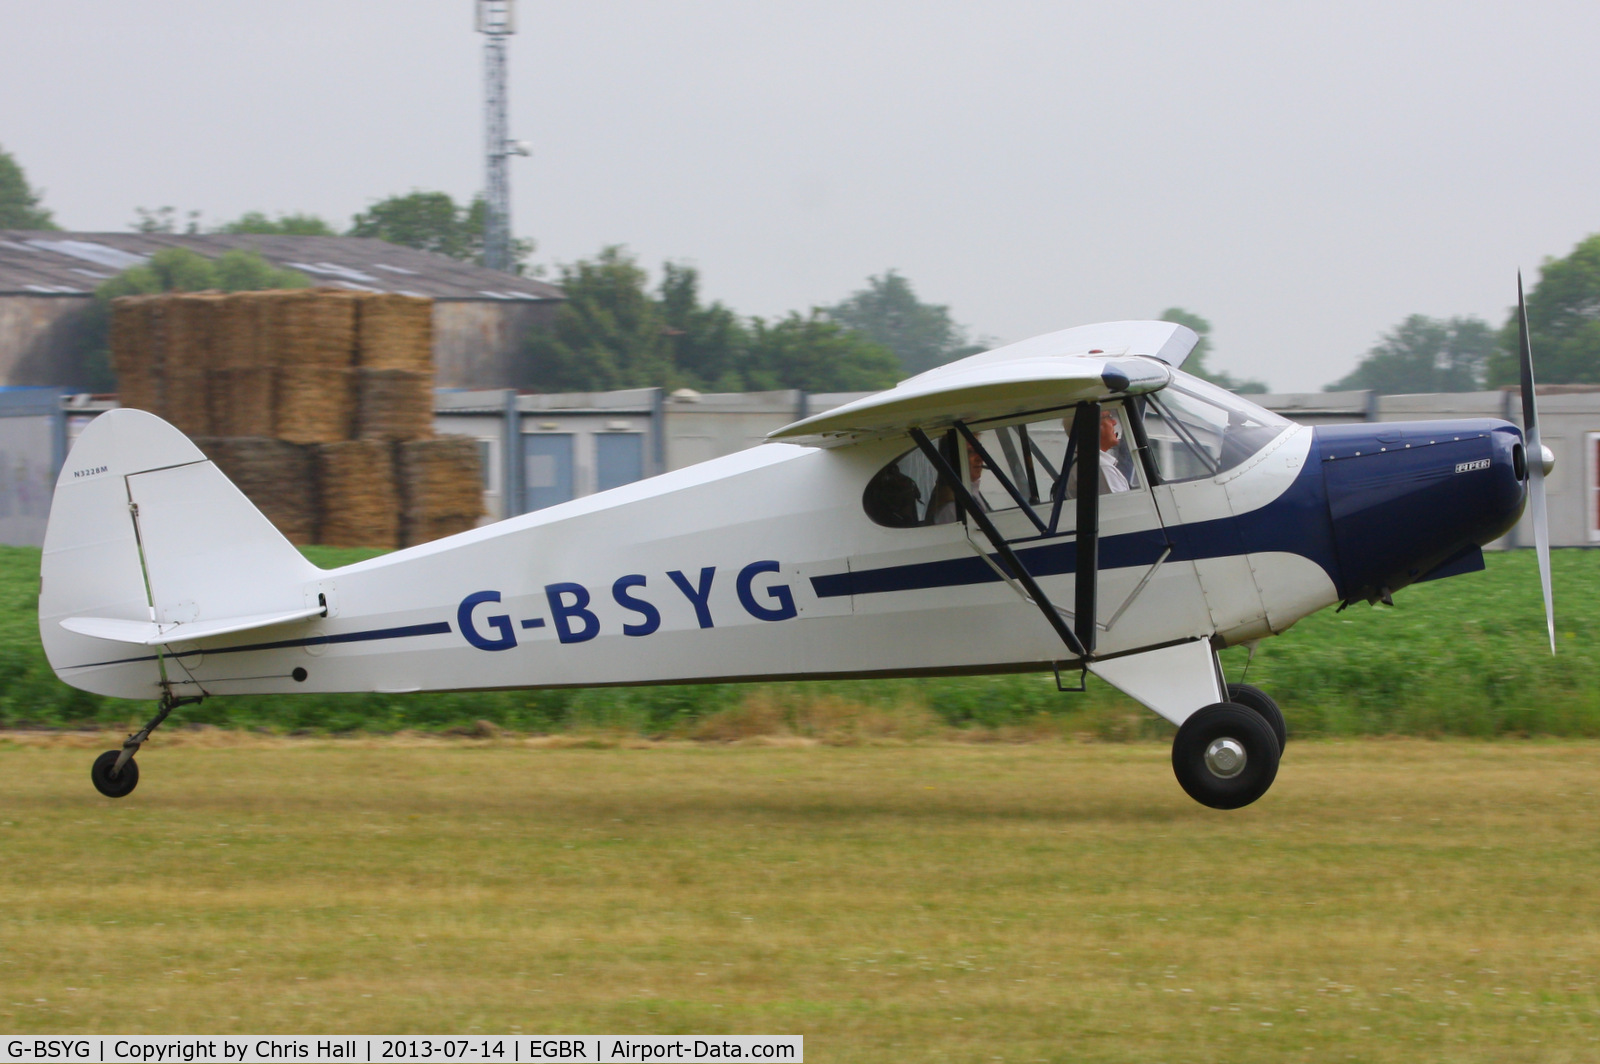 G-BSYG, 1947 Piper PA-12 Super Cruiser C/N 12-2106, at the Real Aeroplane Club's Wings & Wheels fly-in, Breighton